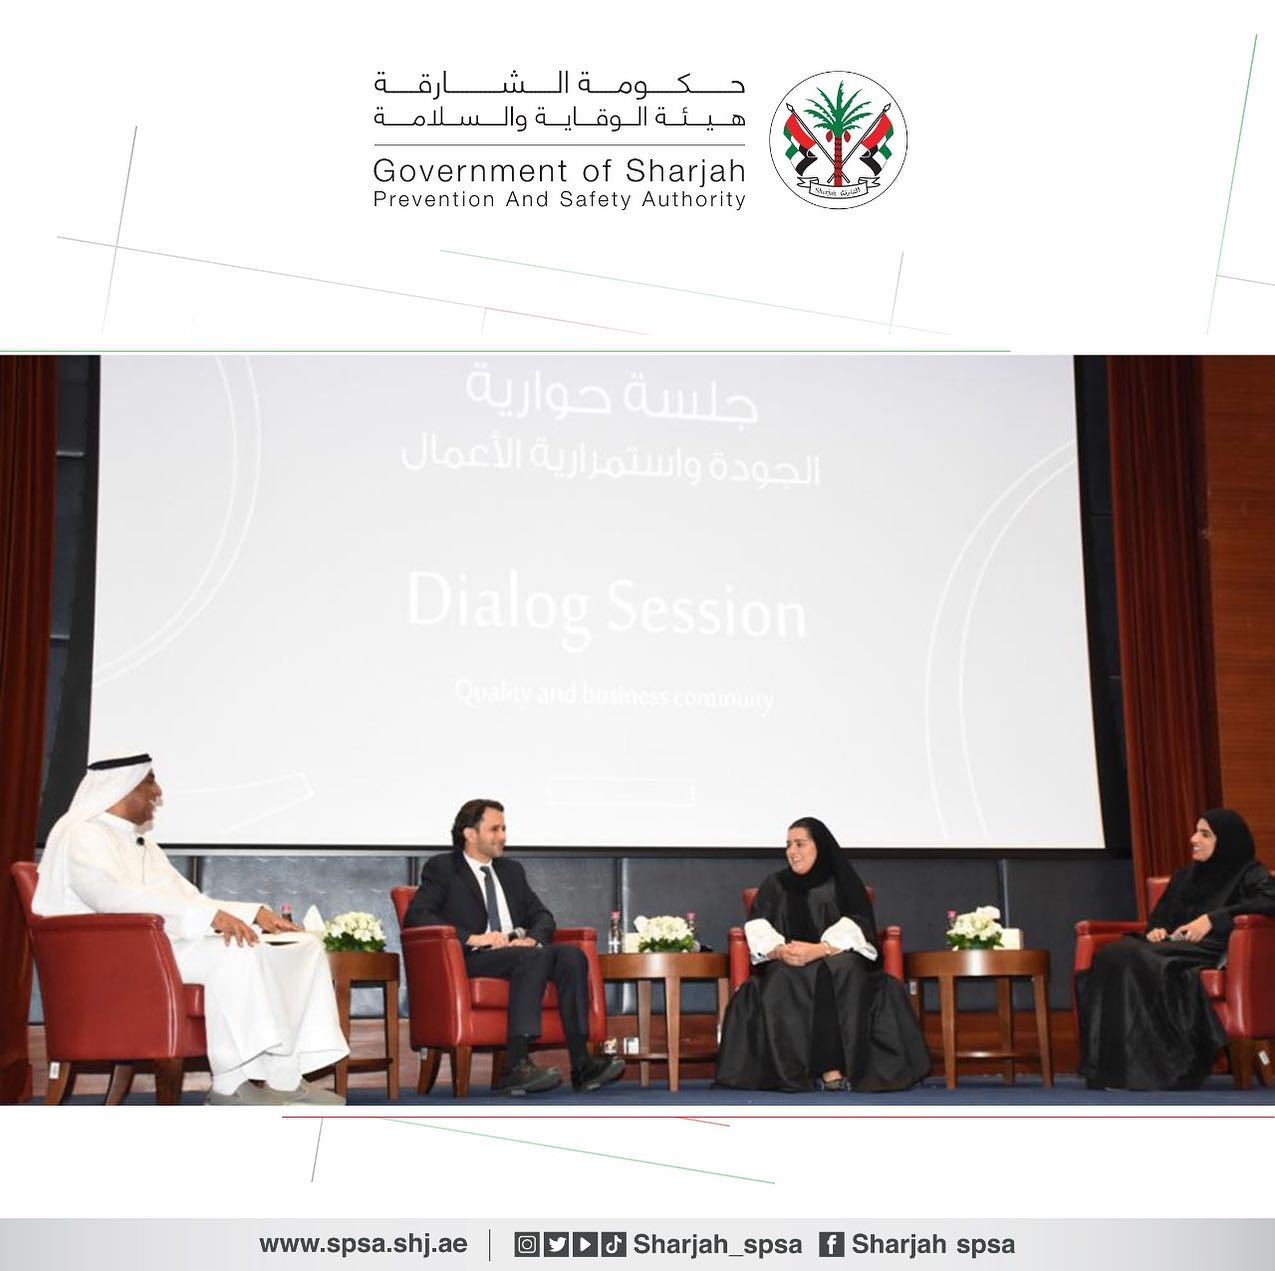 SPSA participated in the forum of Continuous Journey Towards Excellence